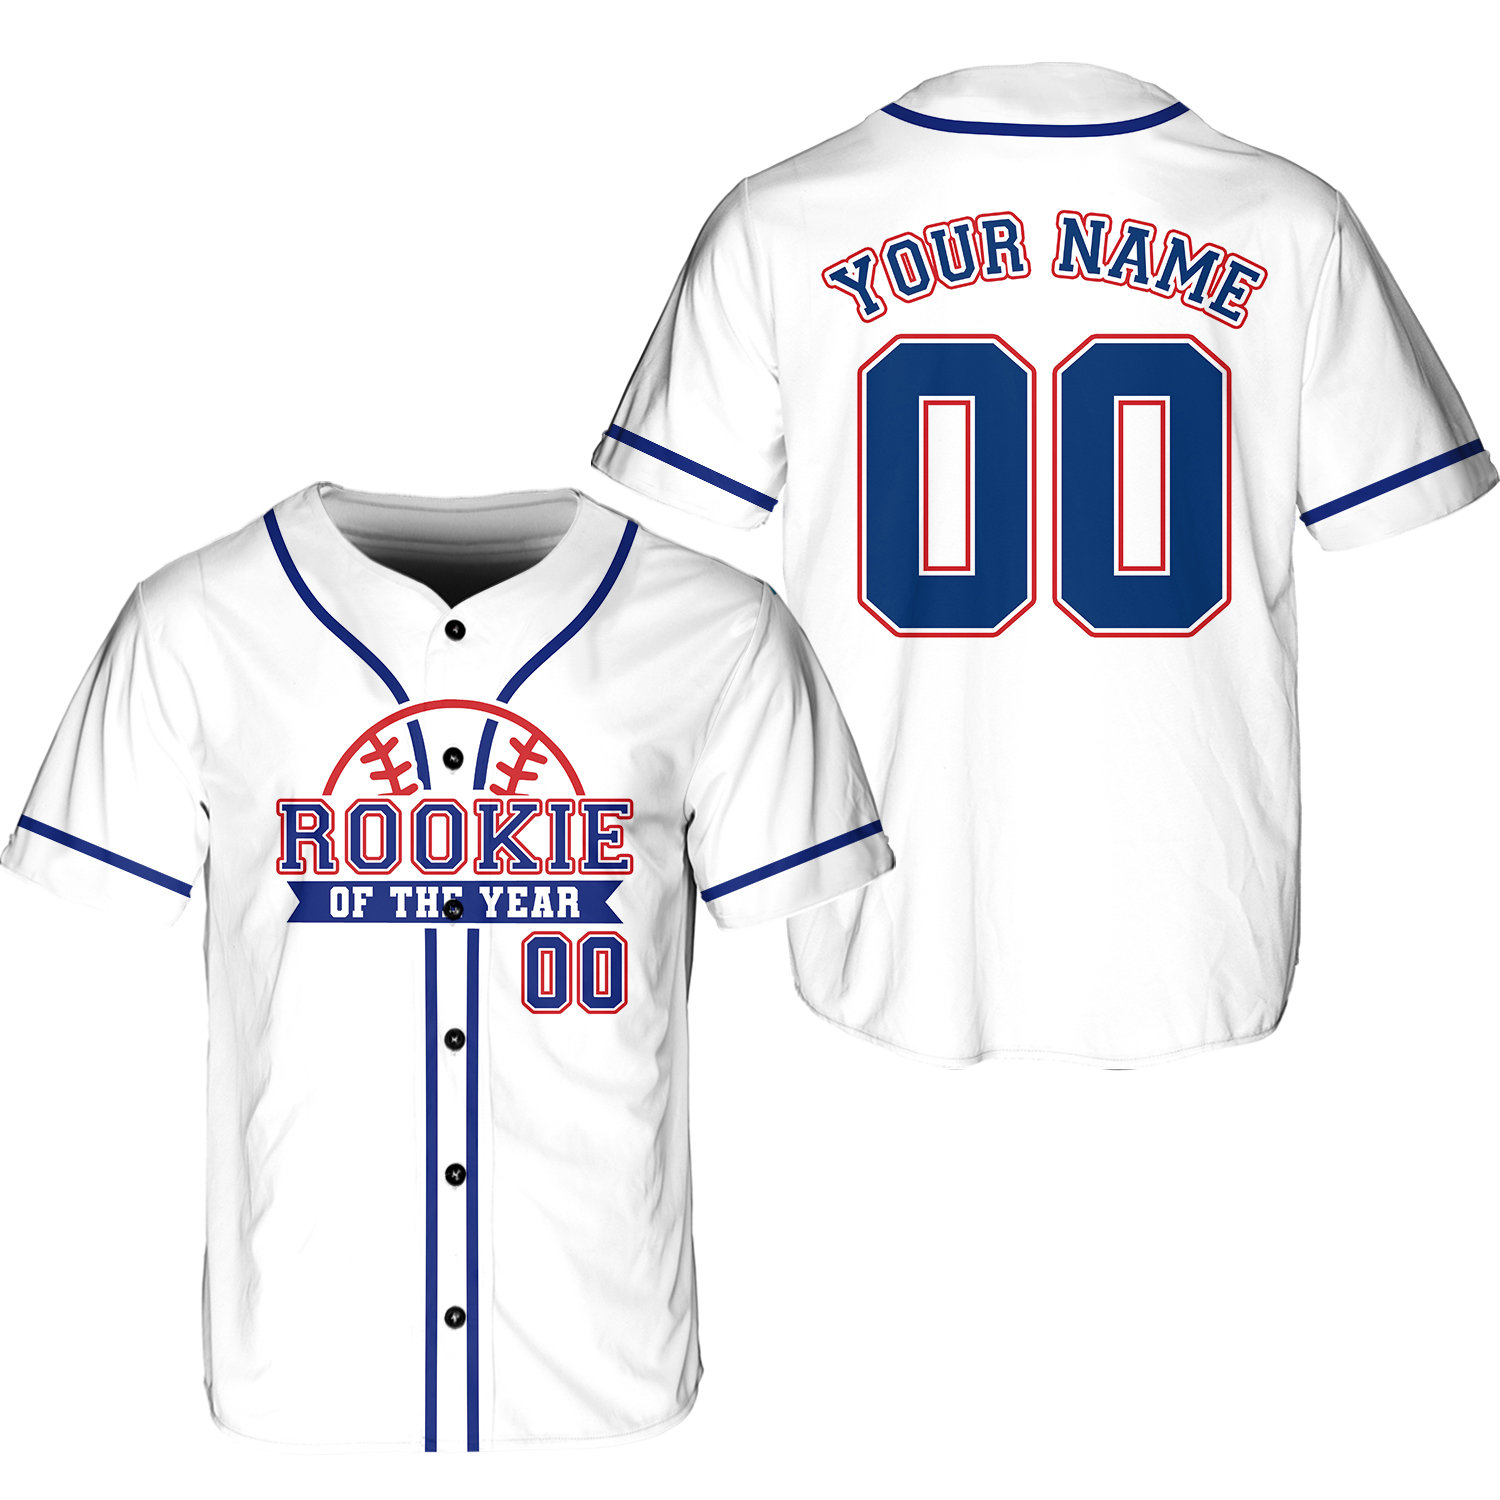 Personalized Family Of the Year Baseball Jersey, Custom Name Number Shirt